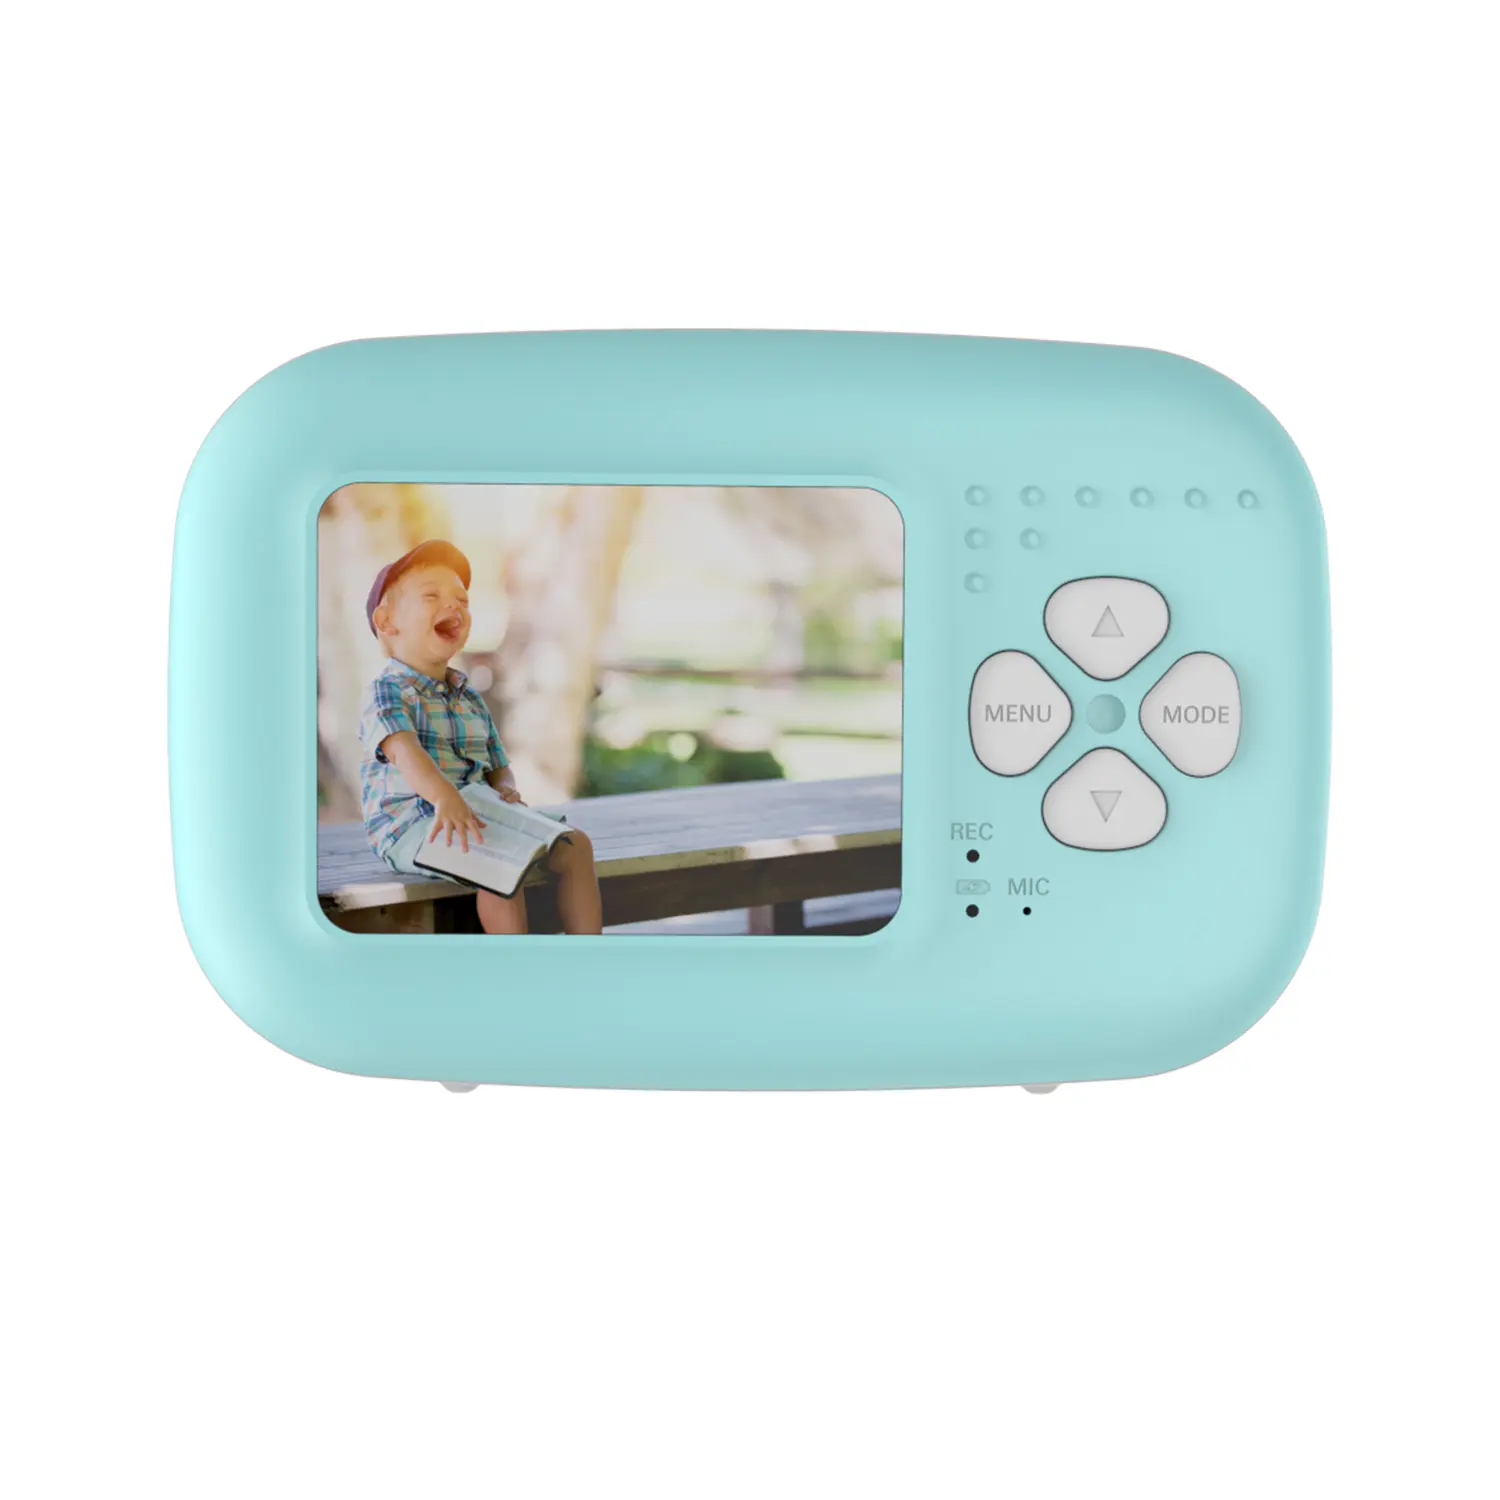 2.0 Inch 1080P Digital Kids Camera, Video Camera For Children, Photo Can be Printed Directly RS-F700